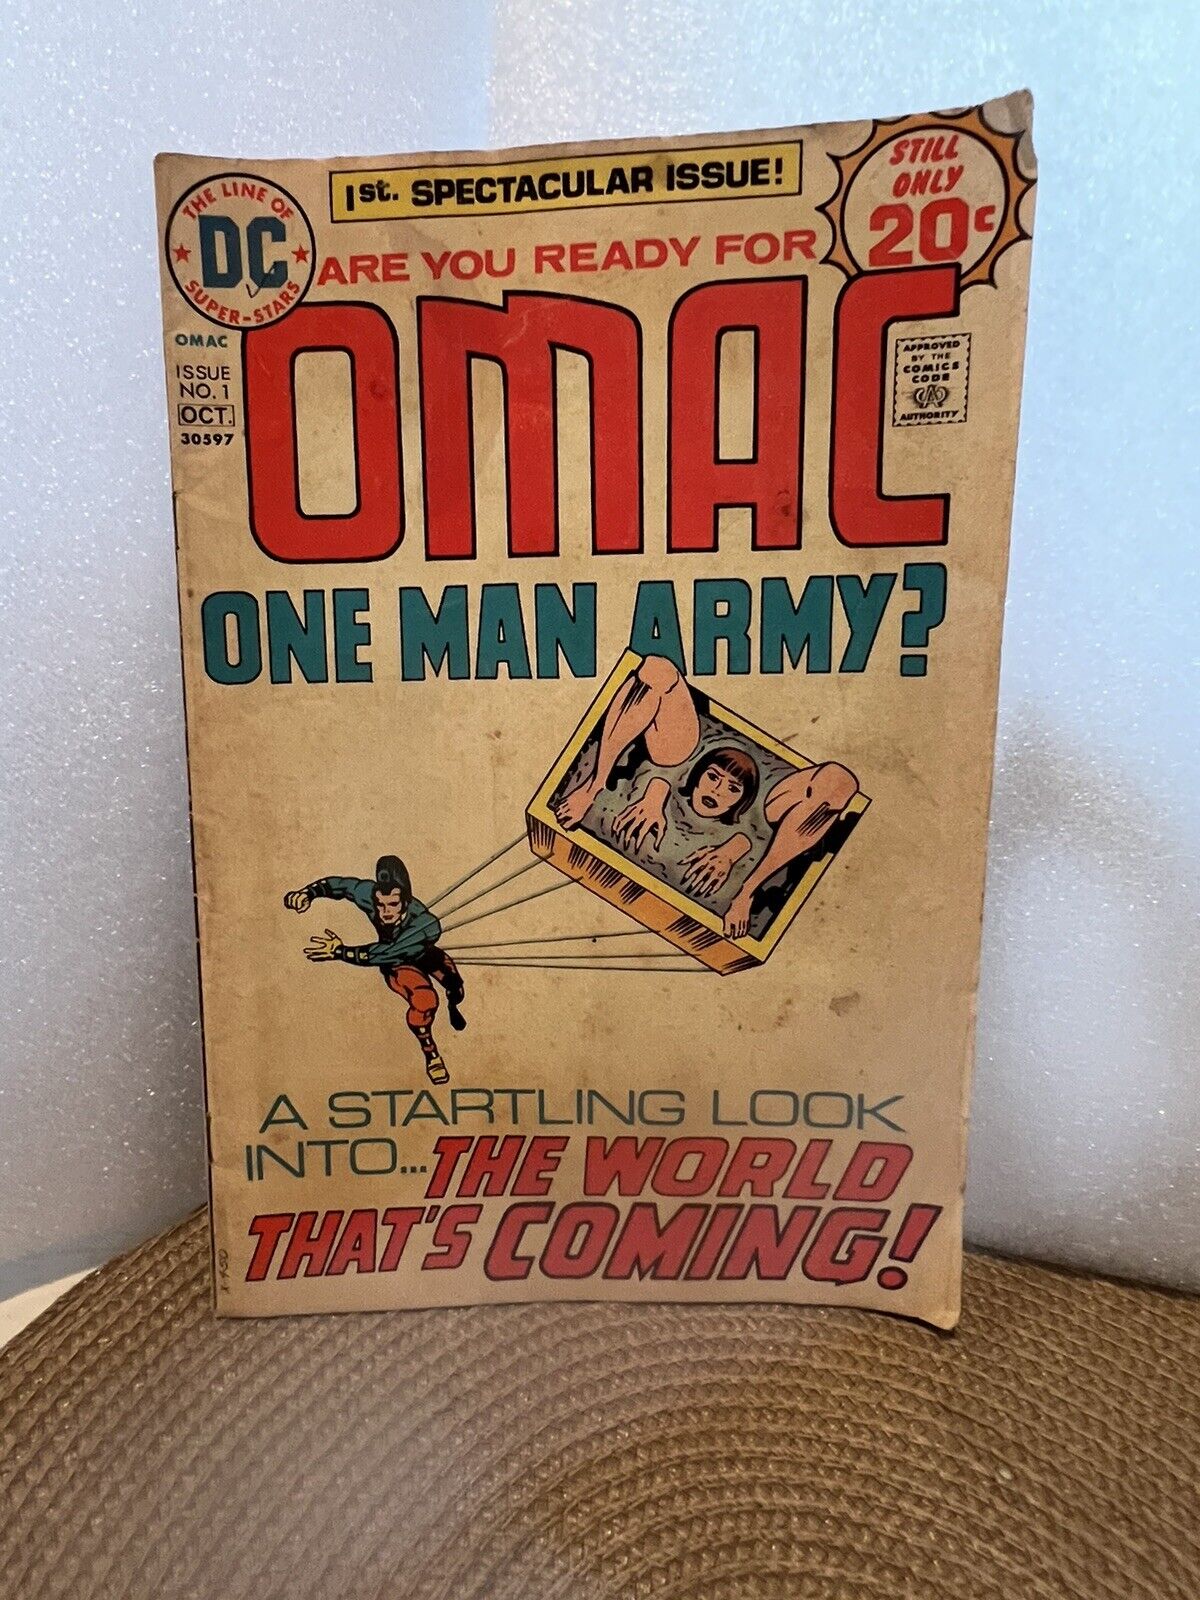 Omac One Man Army - 1st Spectacular Issue - October 30597 - 1974